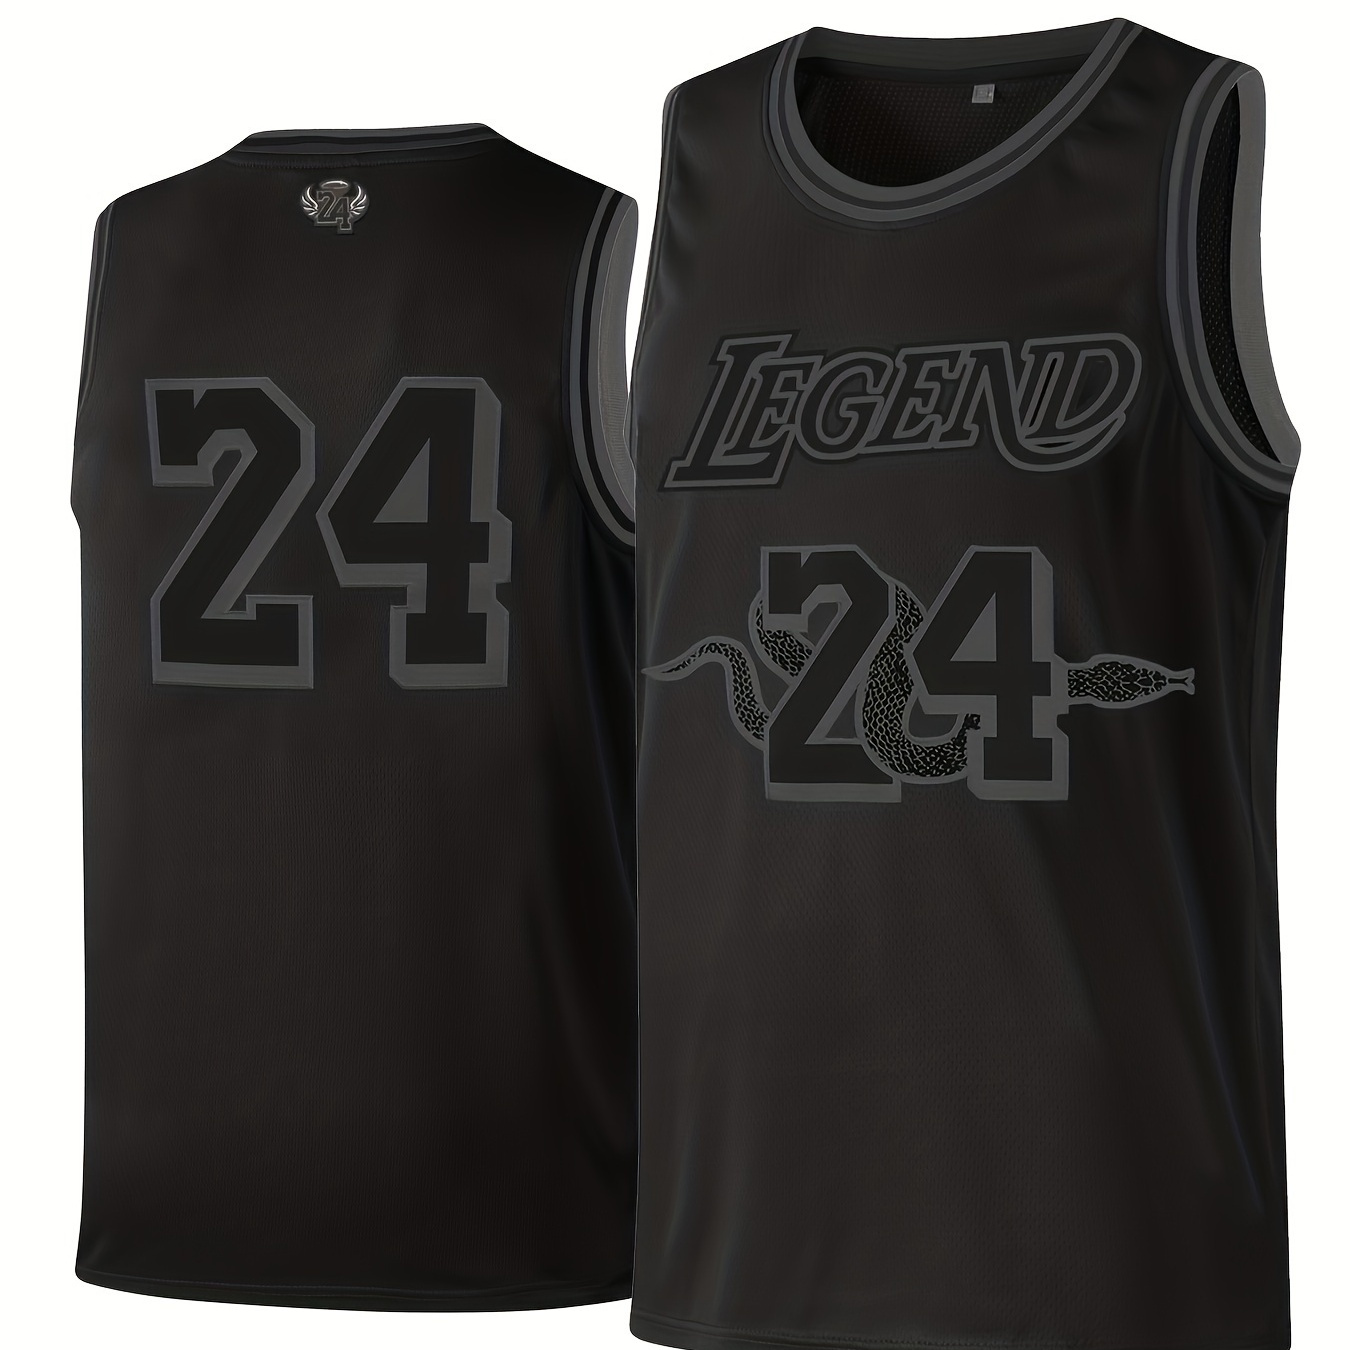 

Men's Legend #24 Embroidered Basketball Jersey, Retro Slightly Stretch Breathable Sports Uniform, Sleeveless Basketball Shirt For Training Competition Party